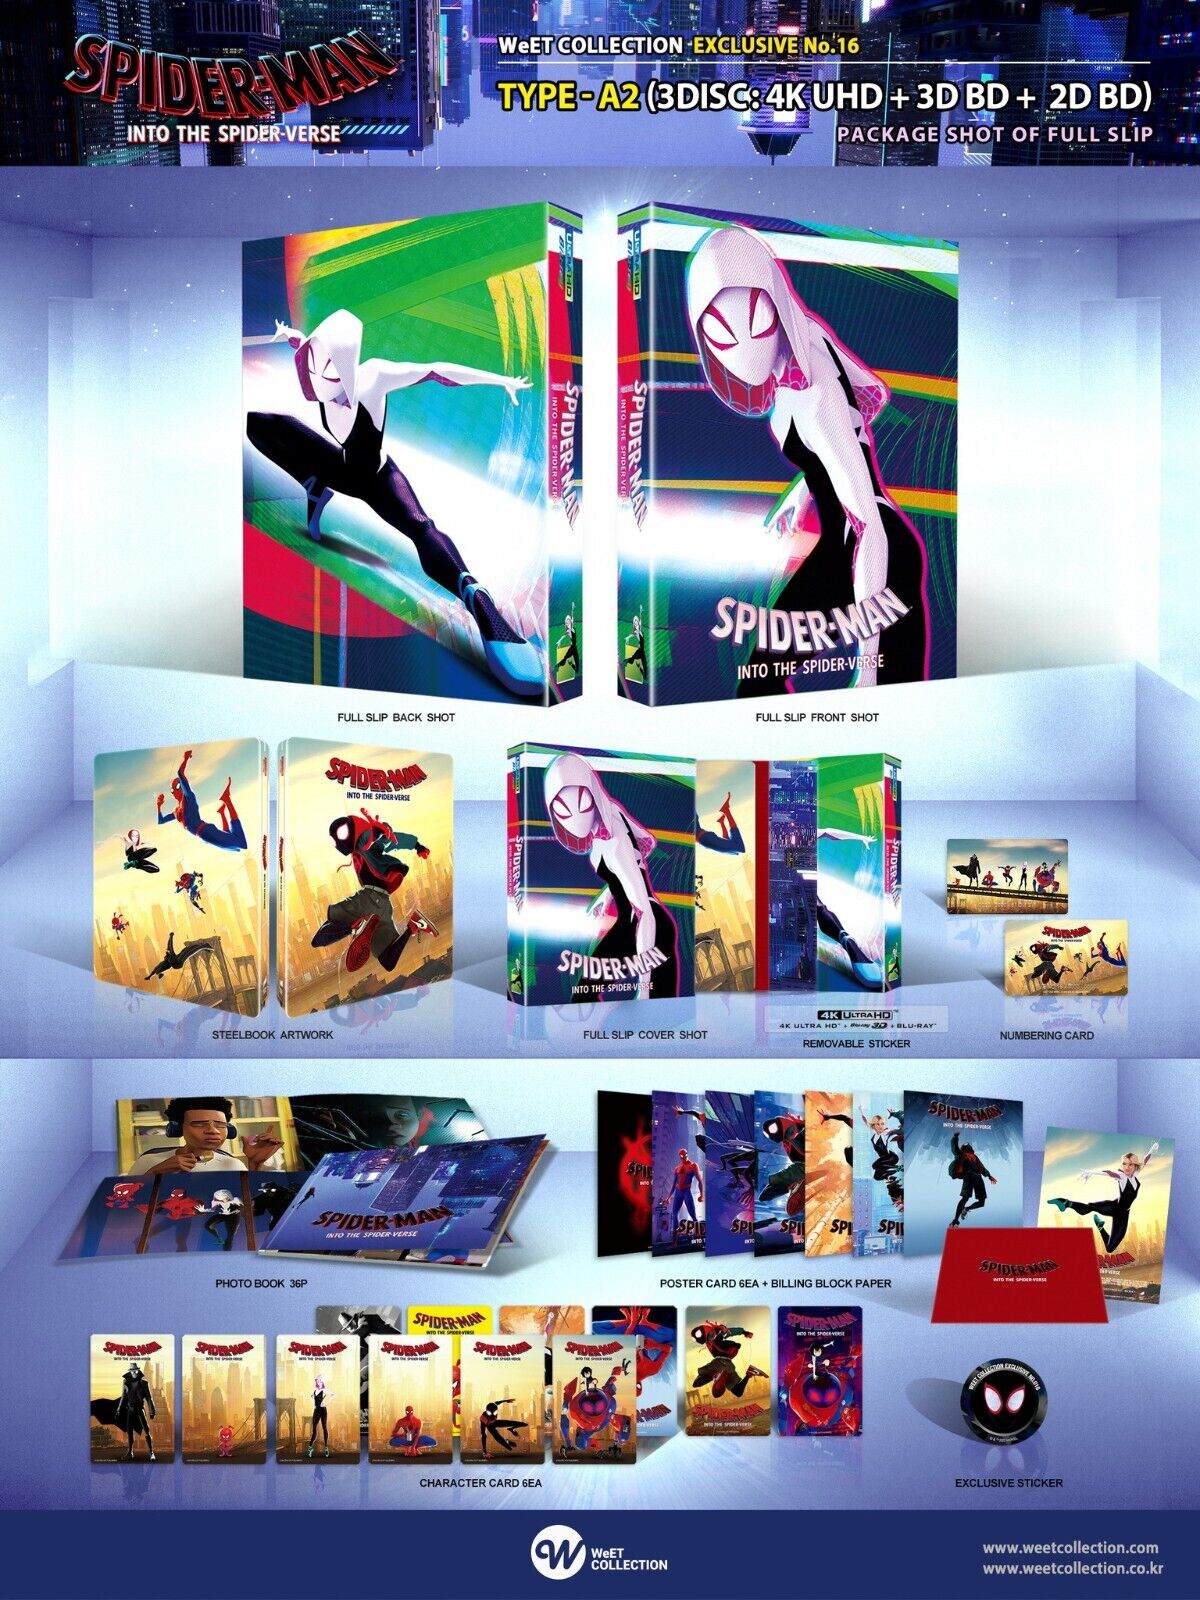 Spider-Man: Into the Spider-Verse 4K Blu-ray Steelbook WeET Collection Exclusive #16 One Click Box Set